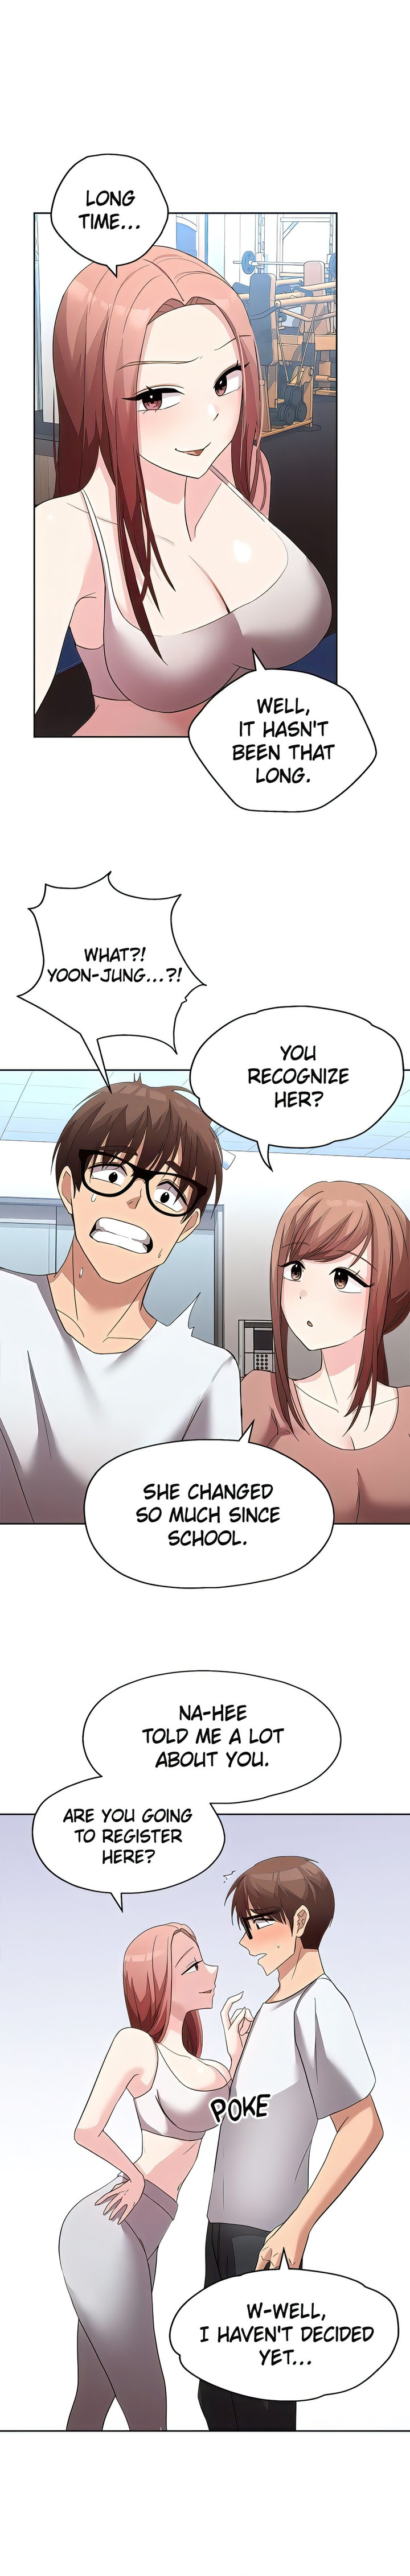 Girls I Used to Teach - Chapter 21 Page 1